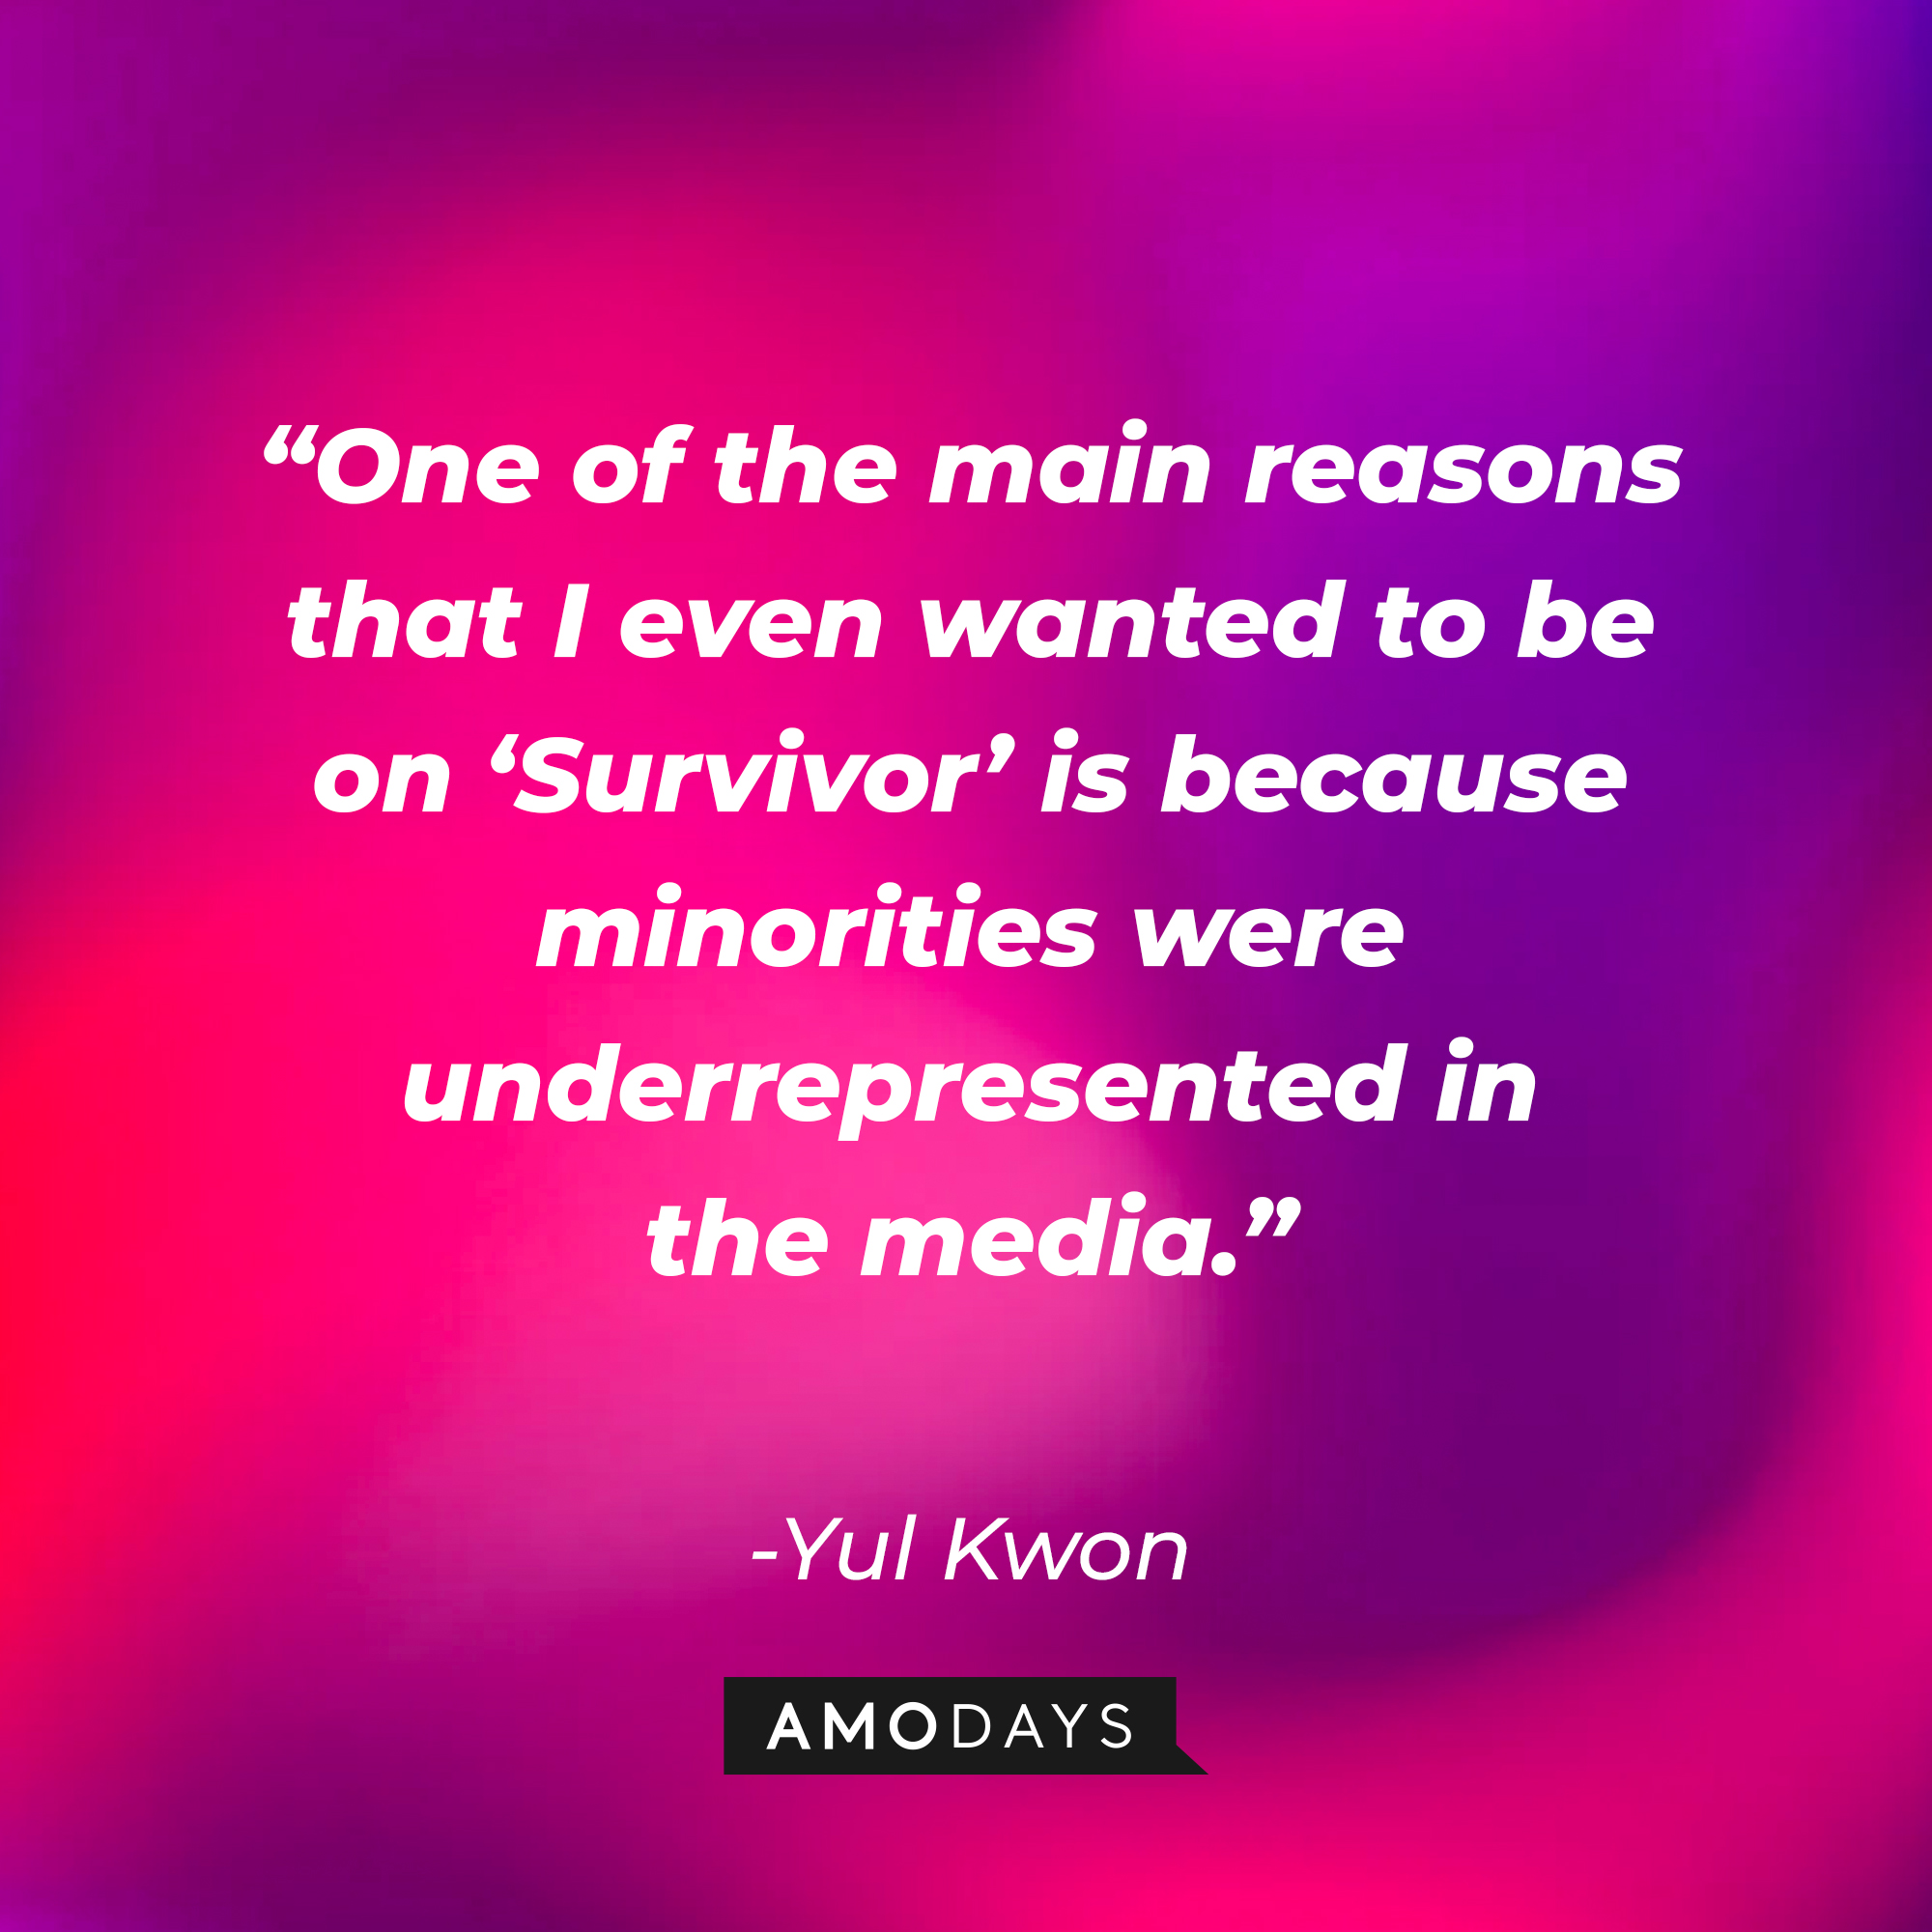 Yul Kwonl’s quote: "One of the main reasons that I even wanted to be on Survivor is because minorities were underrepresented in the media.│ Source: AmoDays